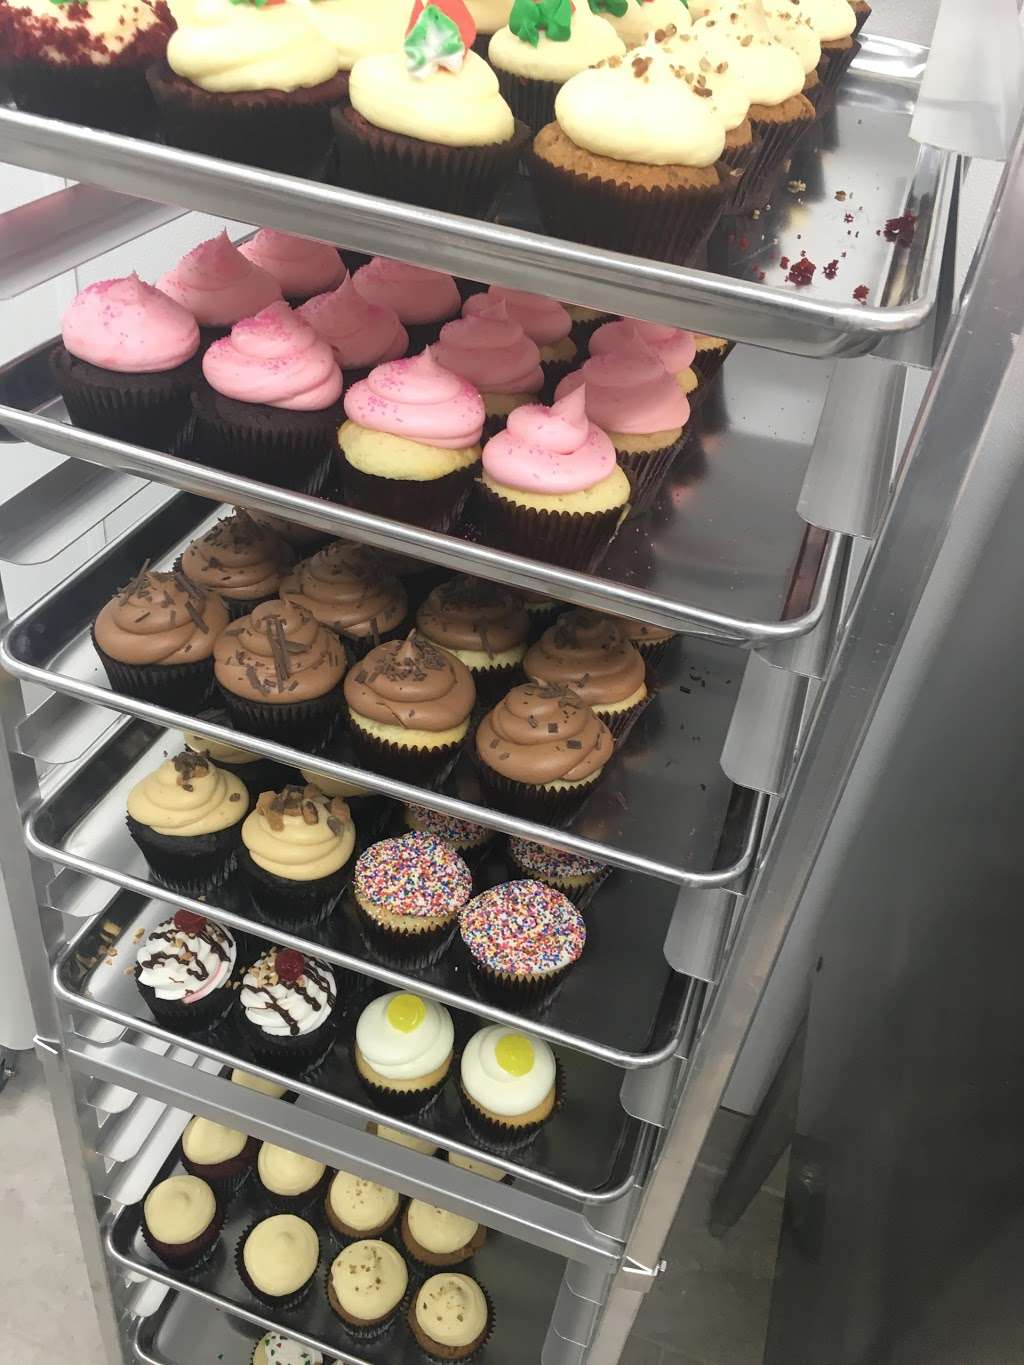 Smallcakes | 3141 FM 528 Rd Suite 348, Friendswood, TX 77546 | Phone: (832) 569-4266